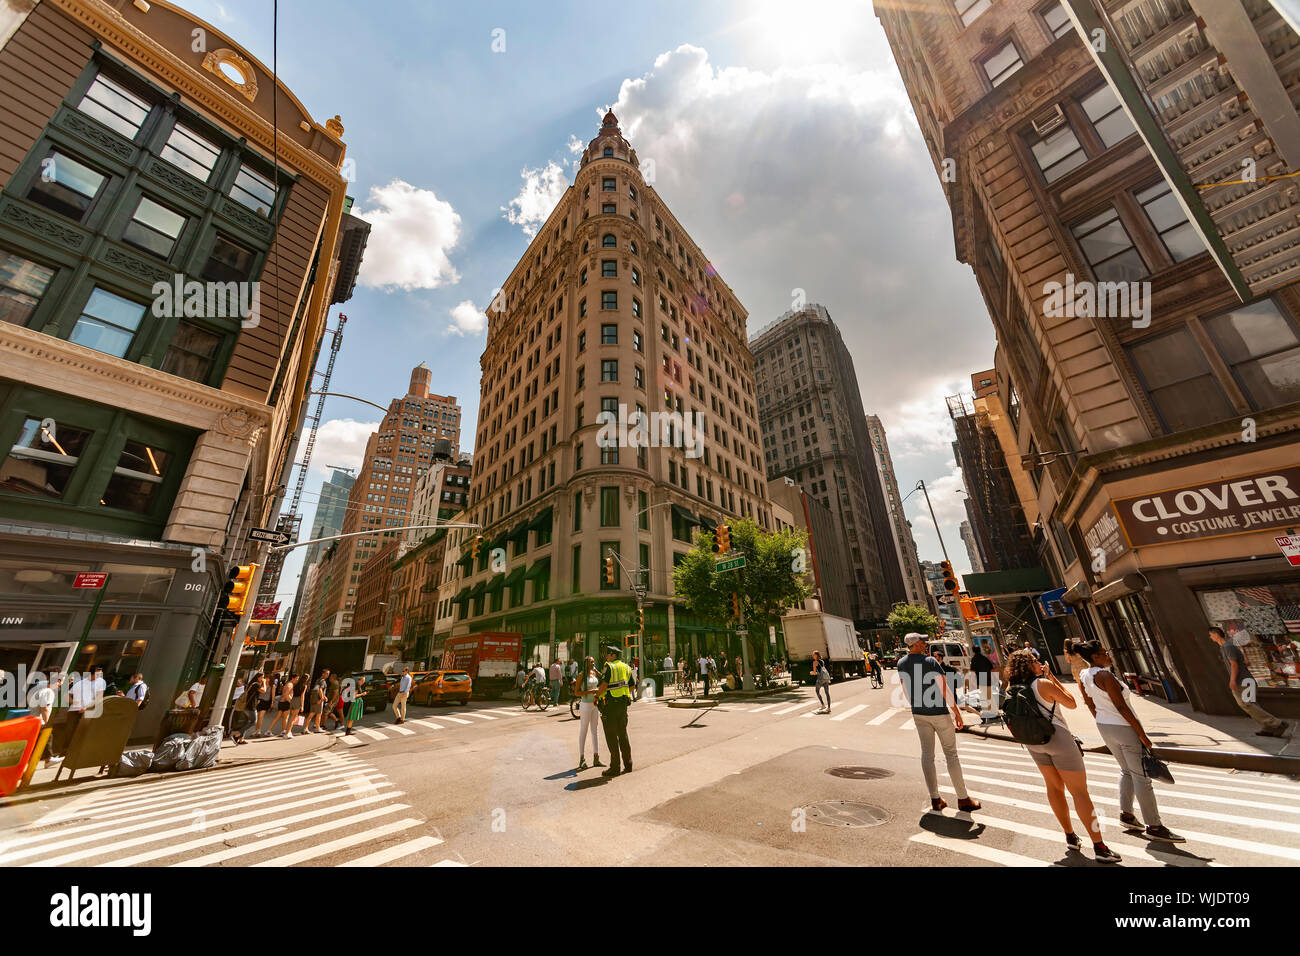 The NoMad Hotel on Broadway in New York is seen on Thursday, August 22, 2019. MGM Resorts International has acquired a 50% stake in the Sydell Group, the company that operates the chain of 16 hotels.(© Richard B. Levine) Stock Photo